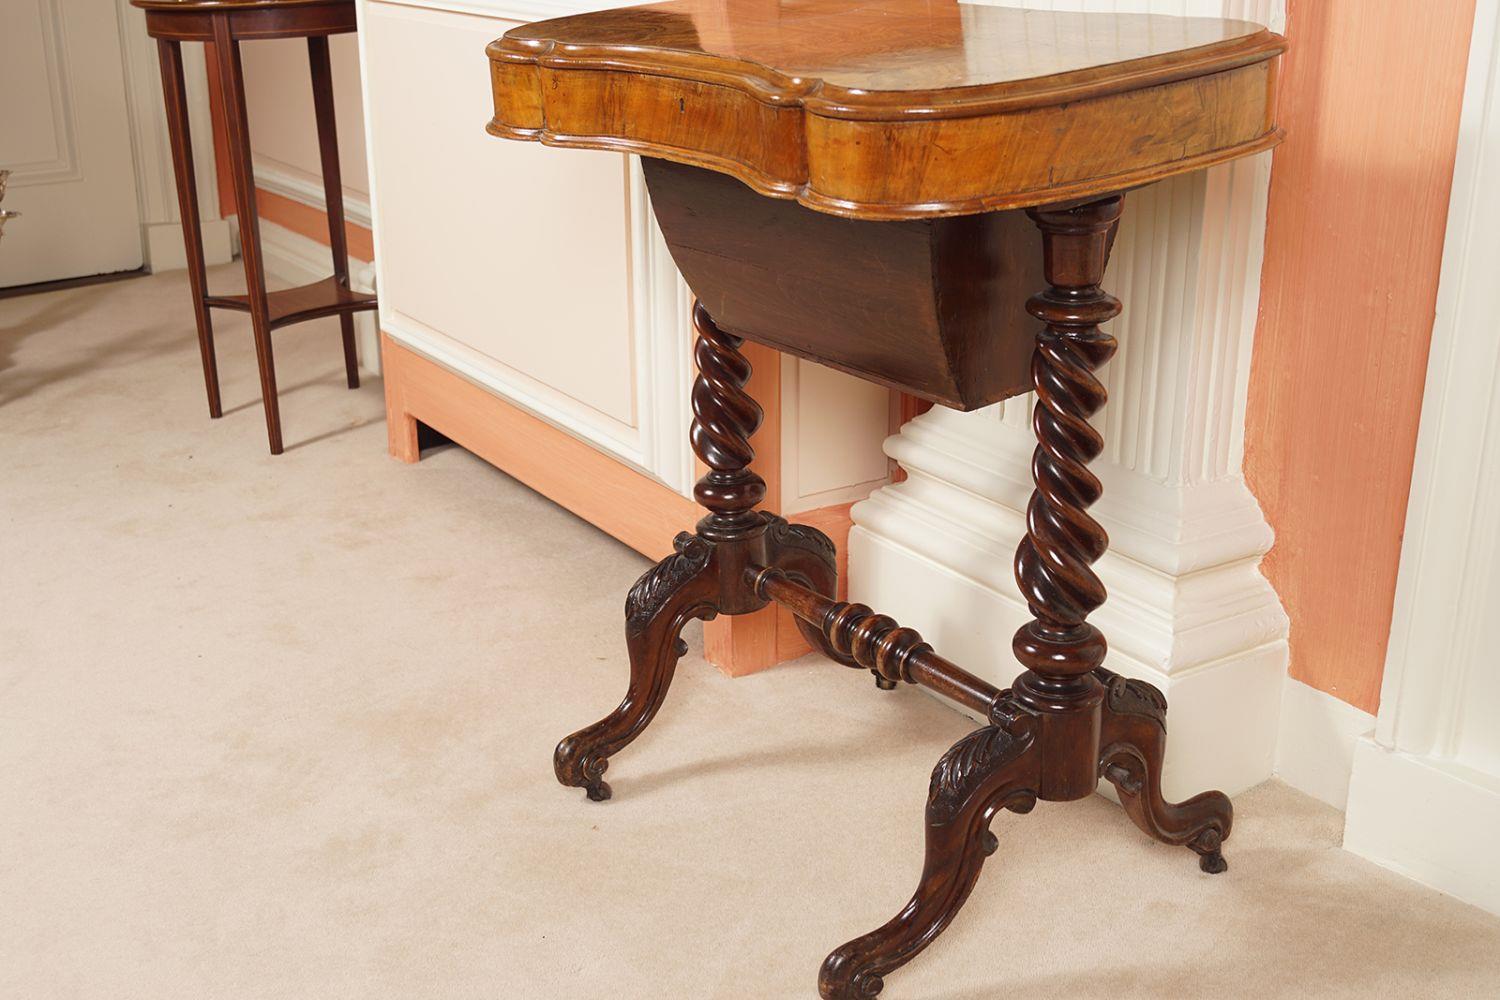 EARLY VICTORIAN BURR WALNUT LAMP TABLE - Image 2 of 2